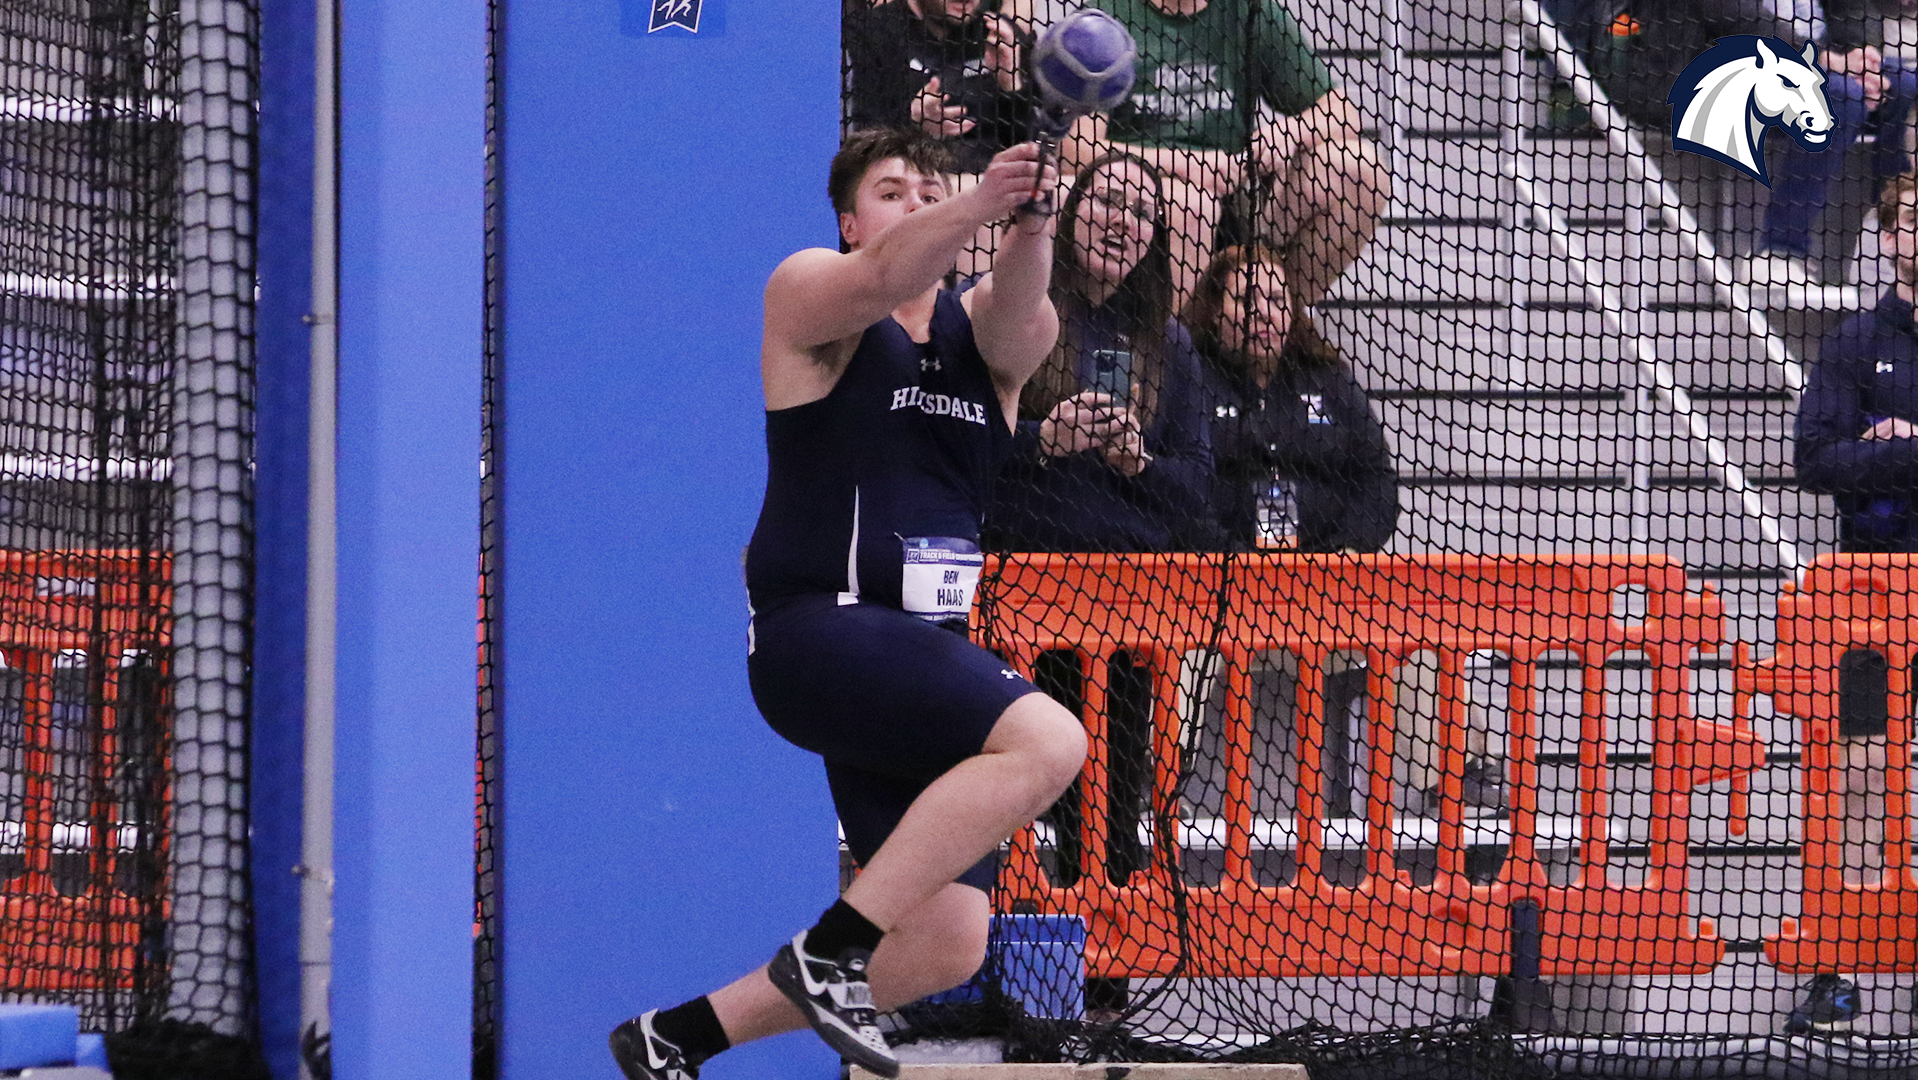 Ben Haas breaks 14-year old Hillsdale weight throw record to lead Tune-Up results